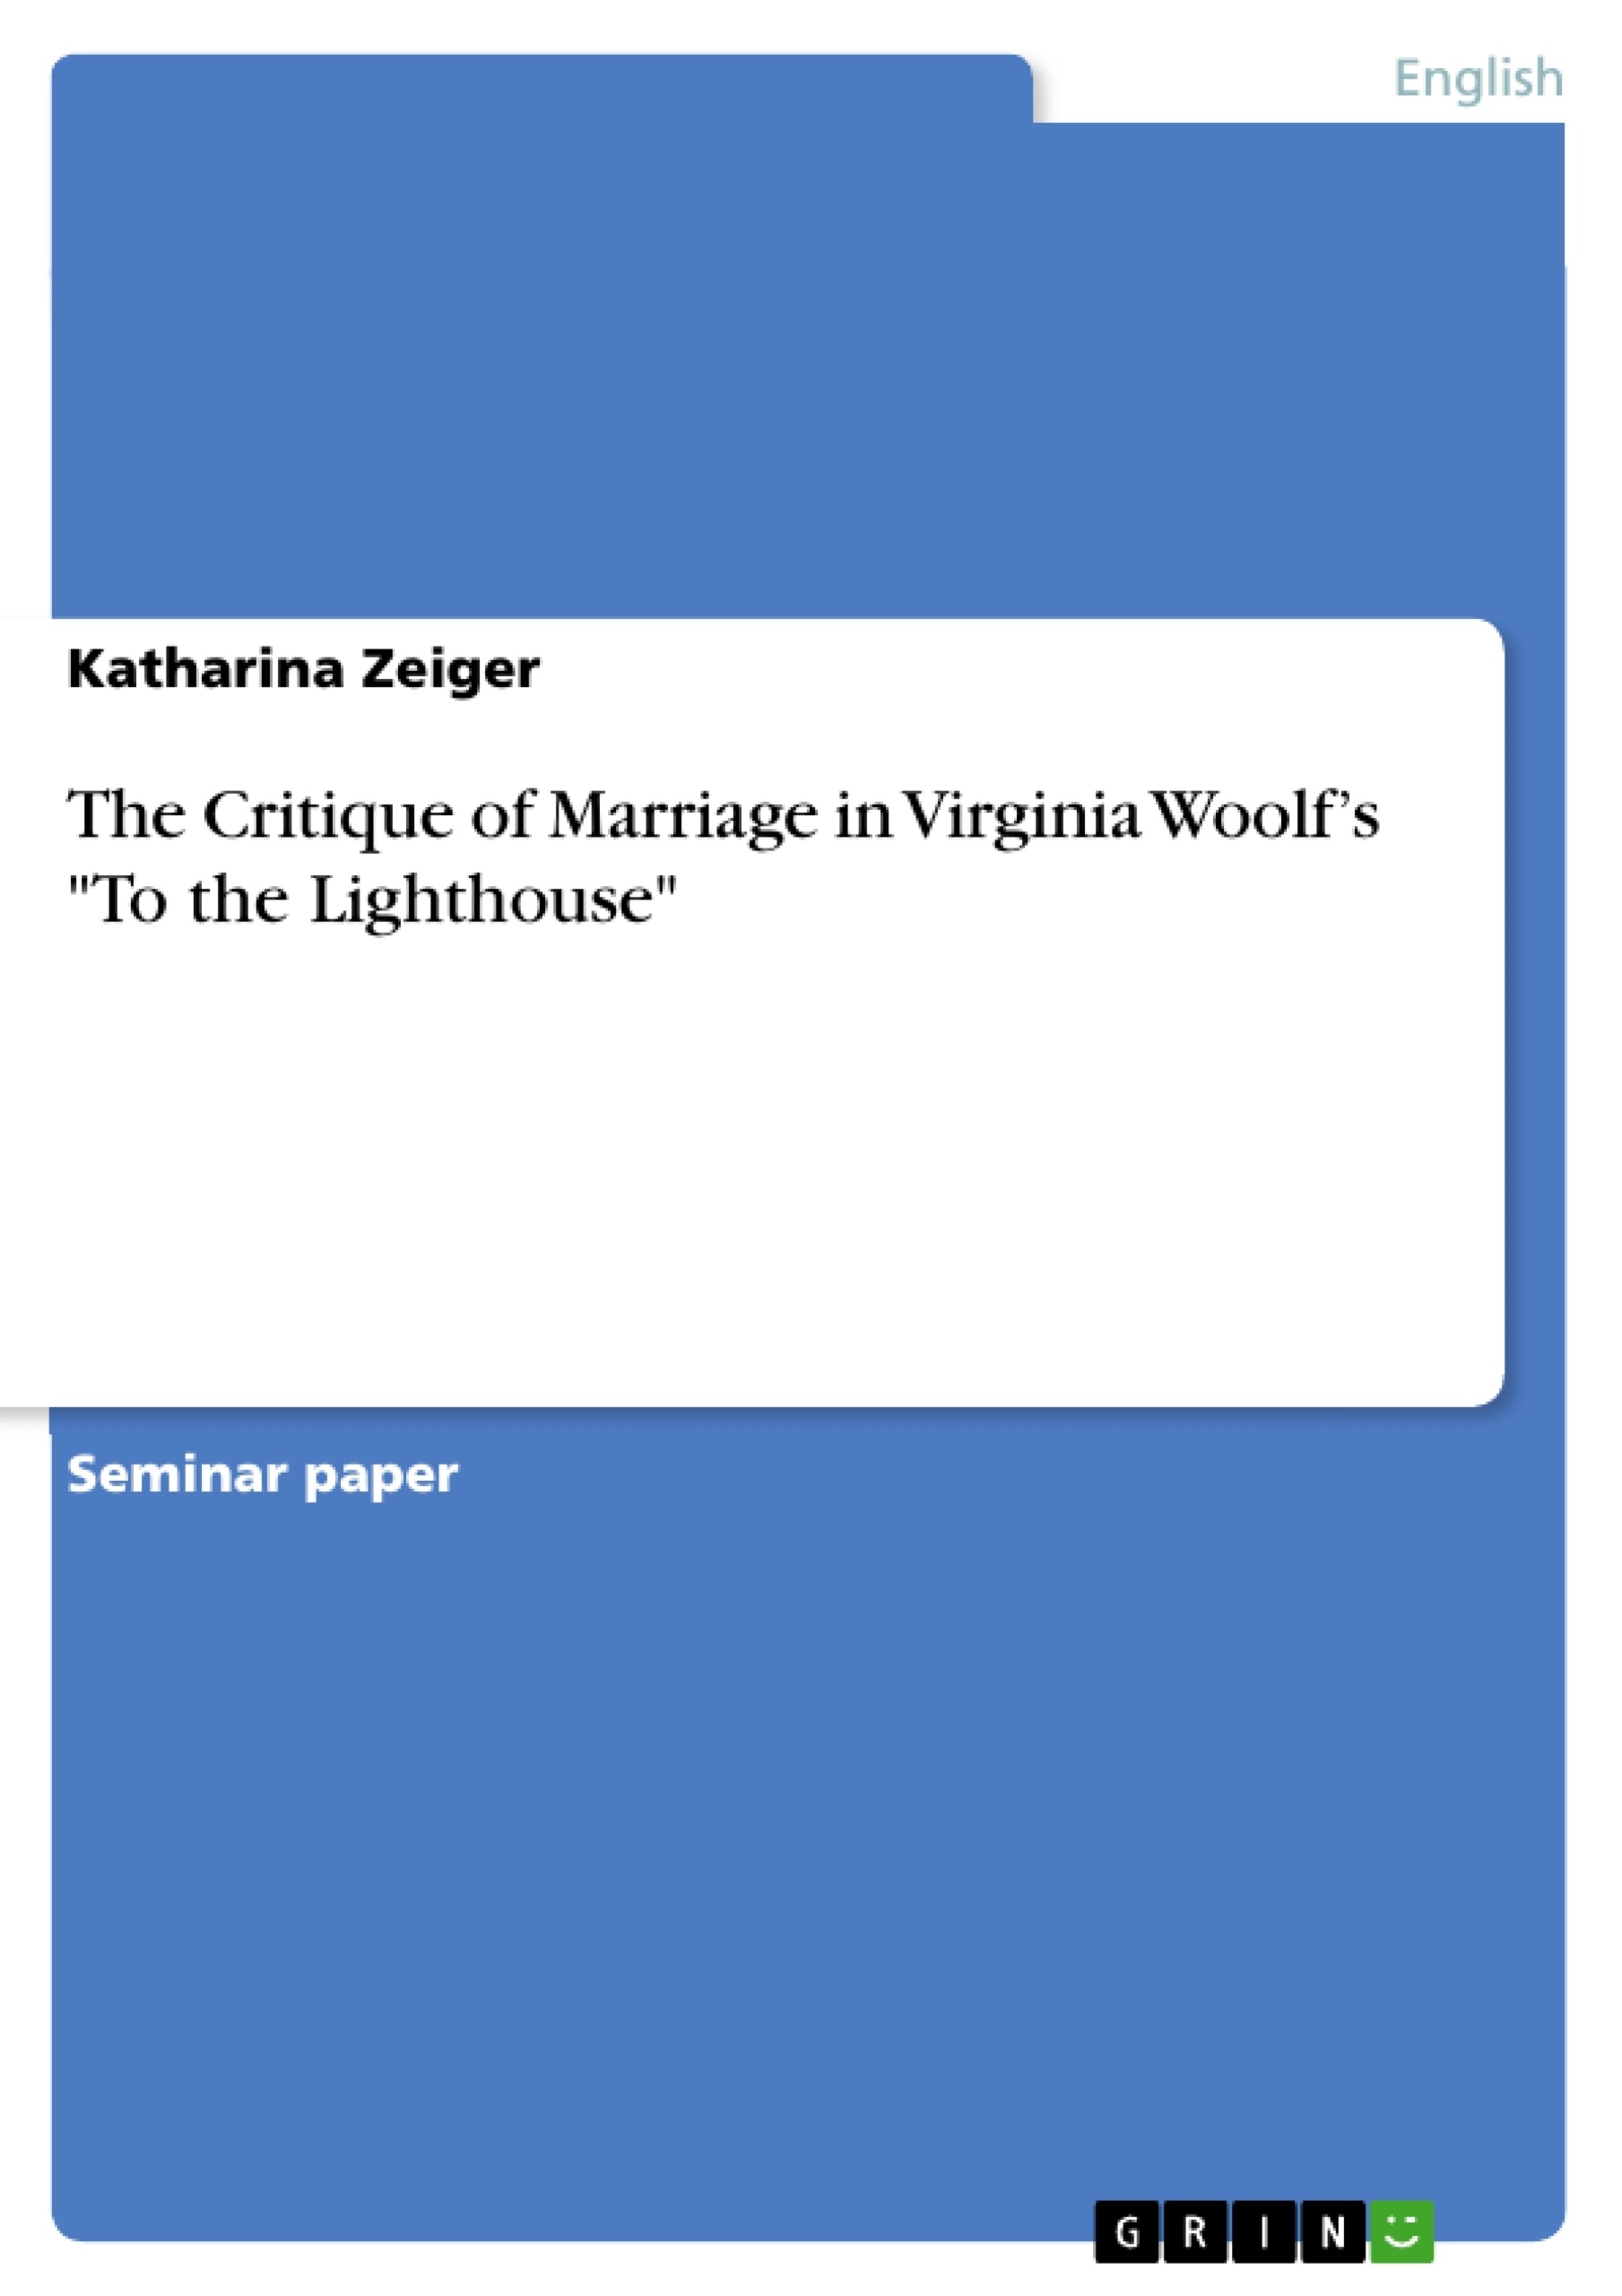 Titre: The Critique of Marriage in Virginia Woolf’s "To the Lighthouse"